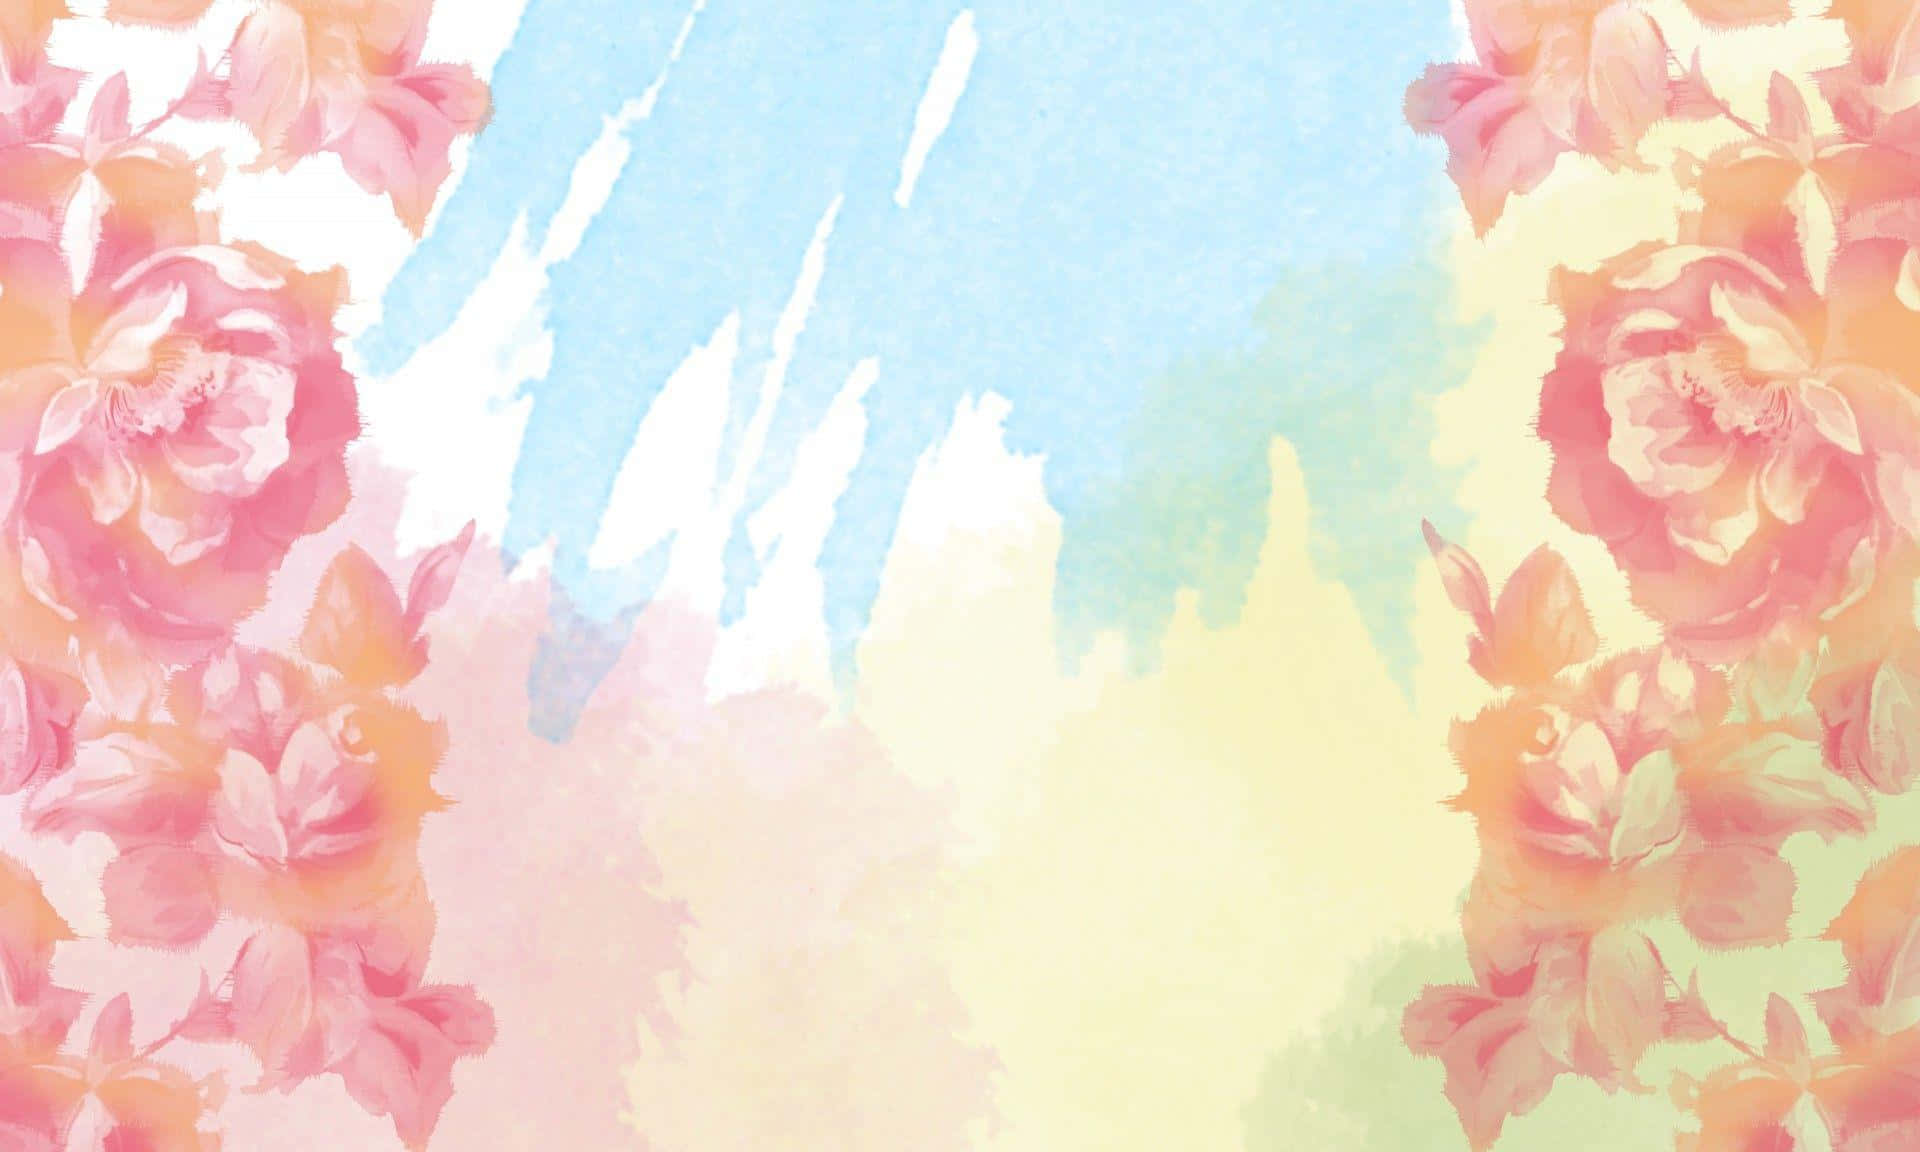 Enjoy the calming beauty of a pastel watercolor background